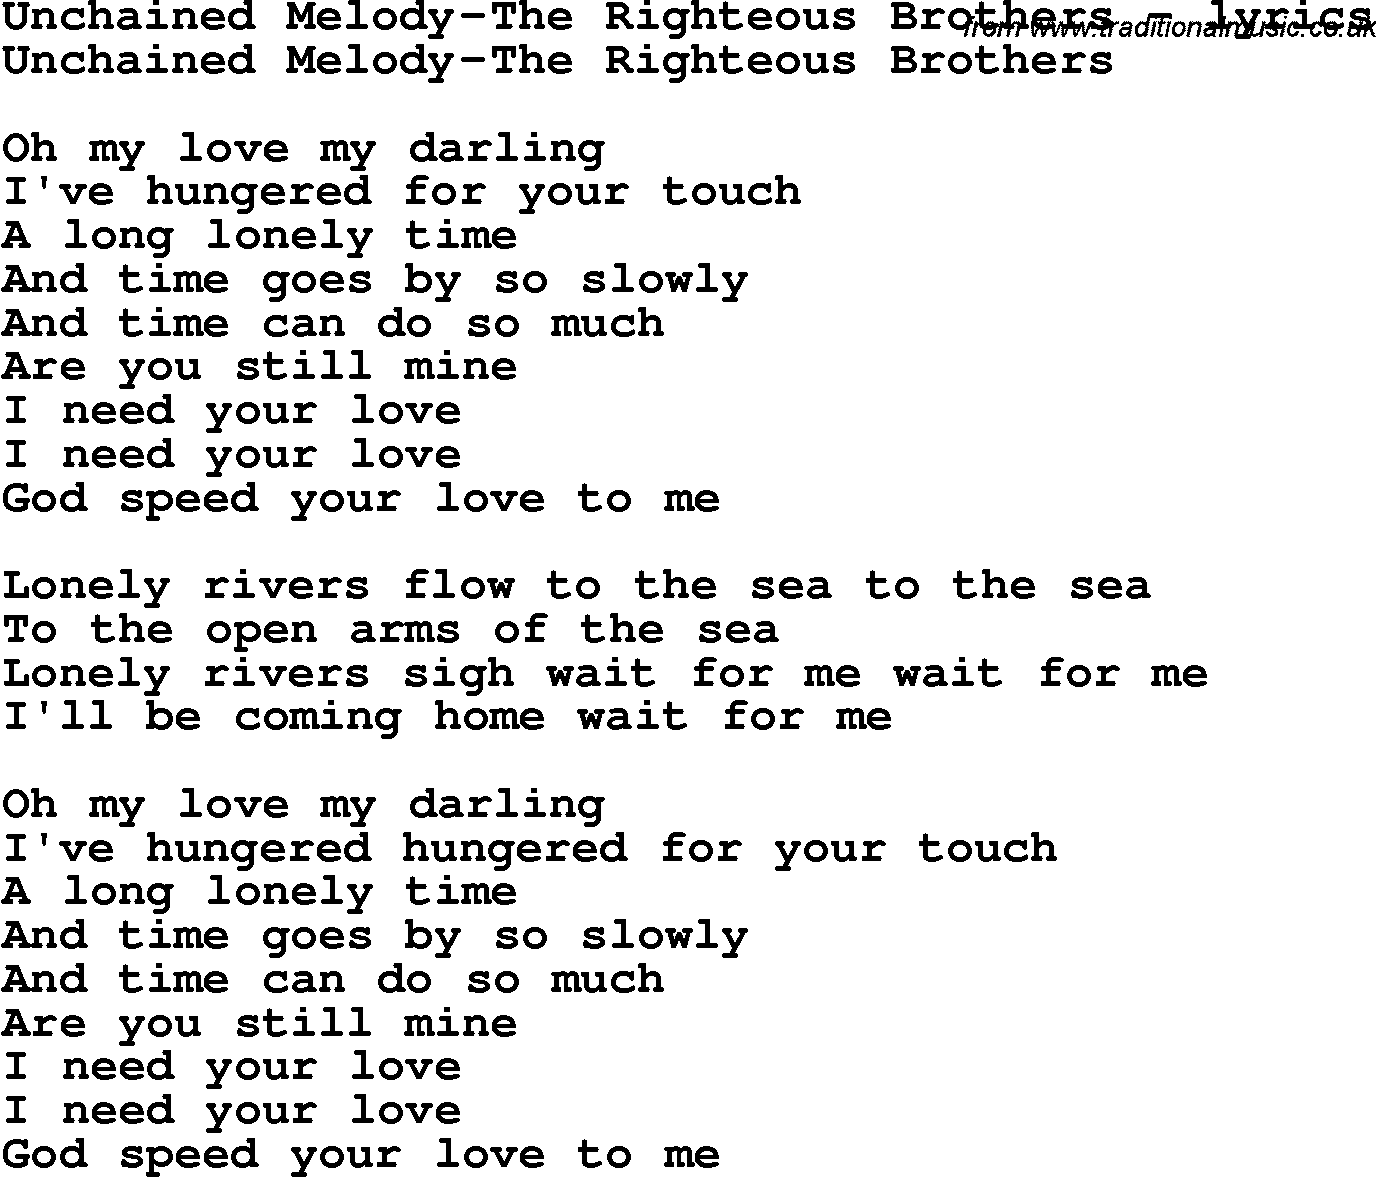 Love Song Lyrics for: Unchained Melody-The Righteous Brothers